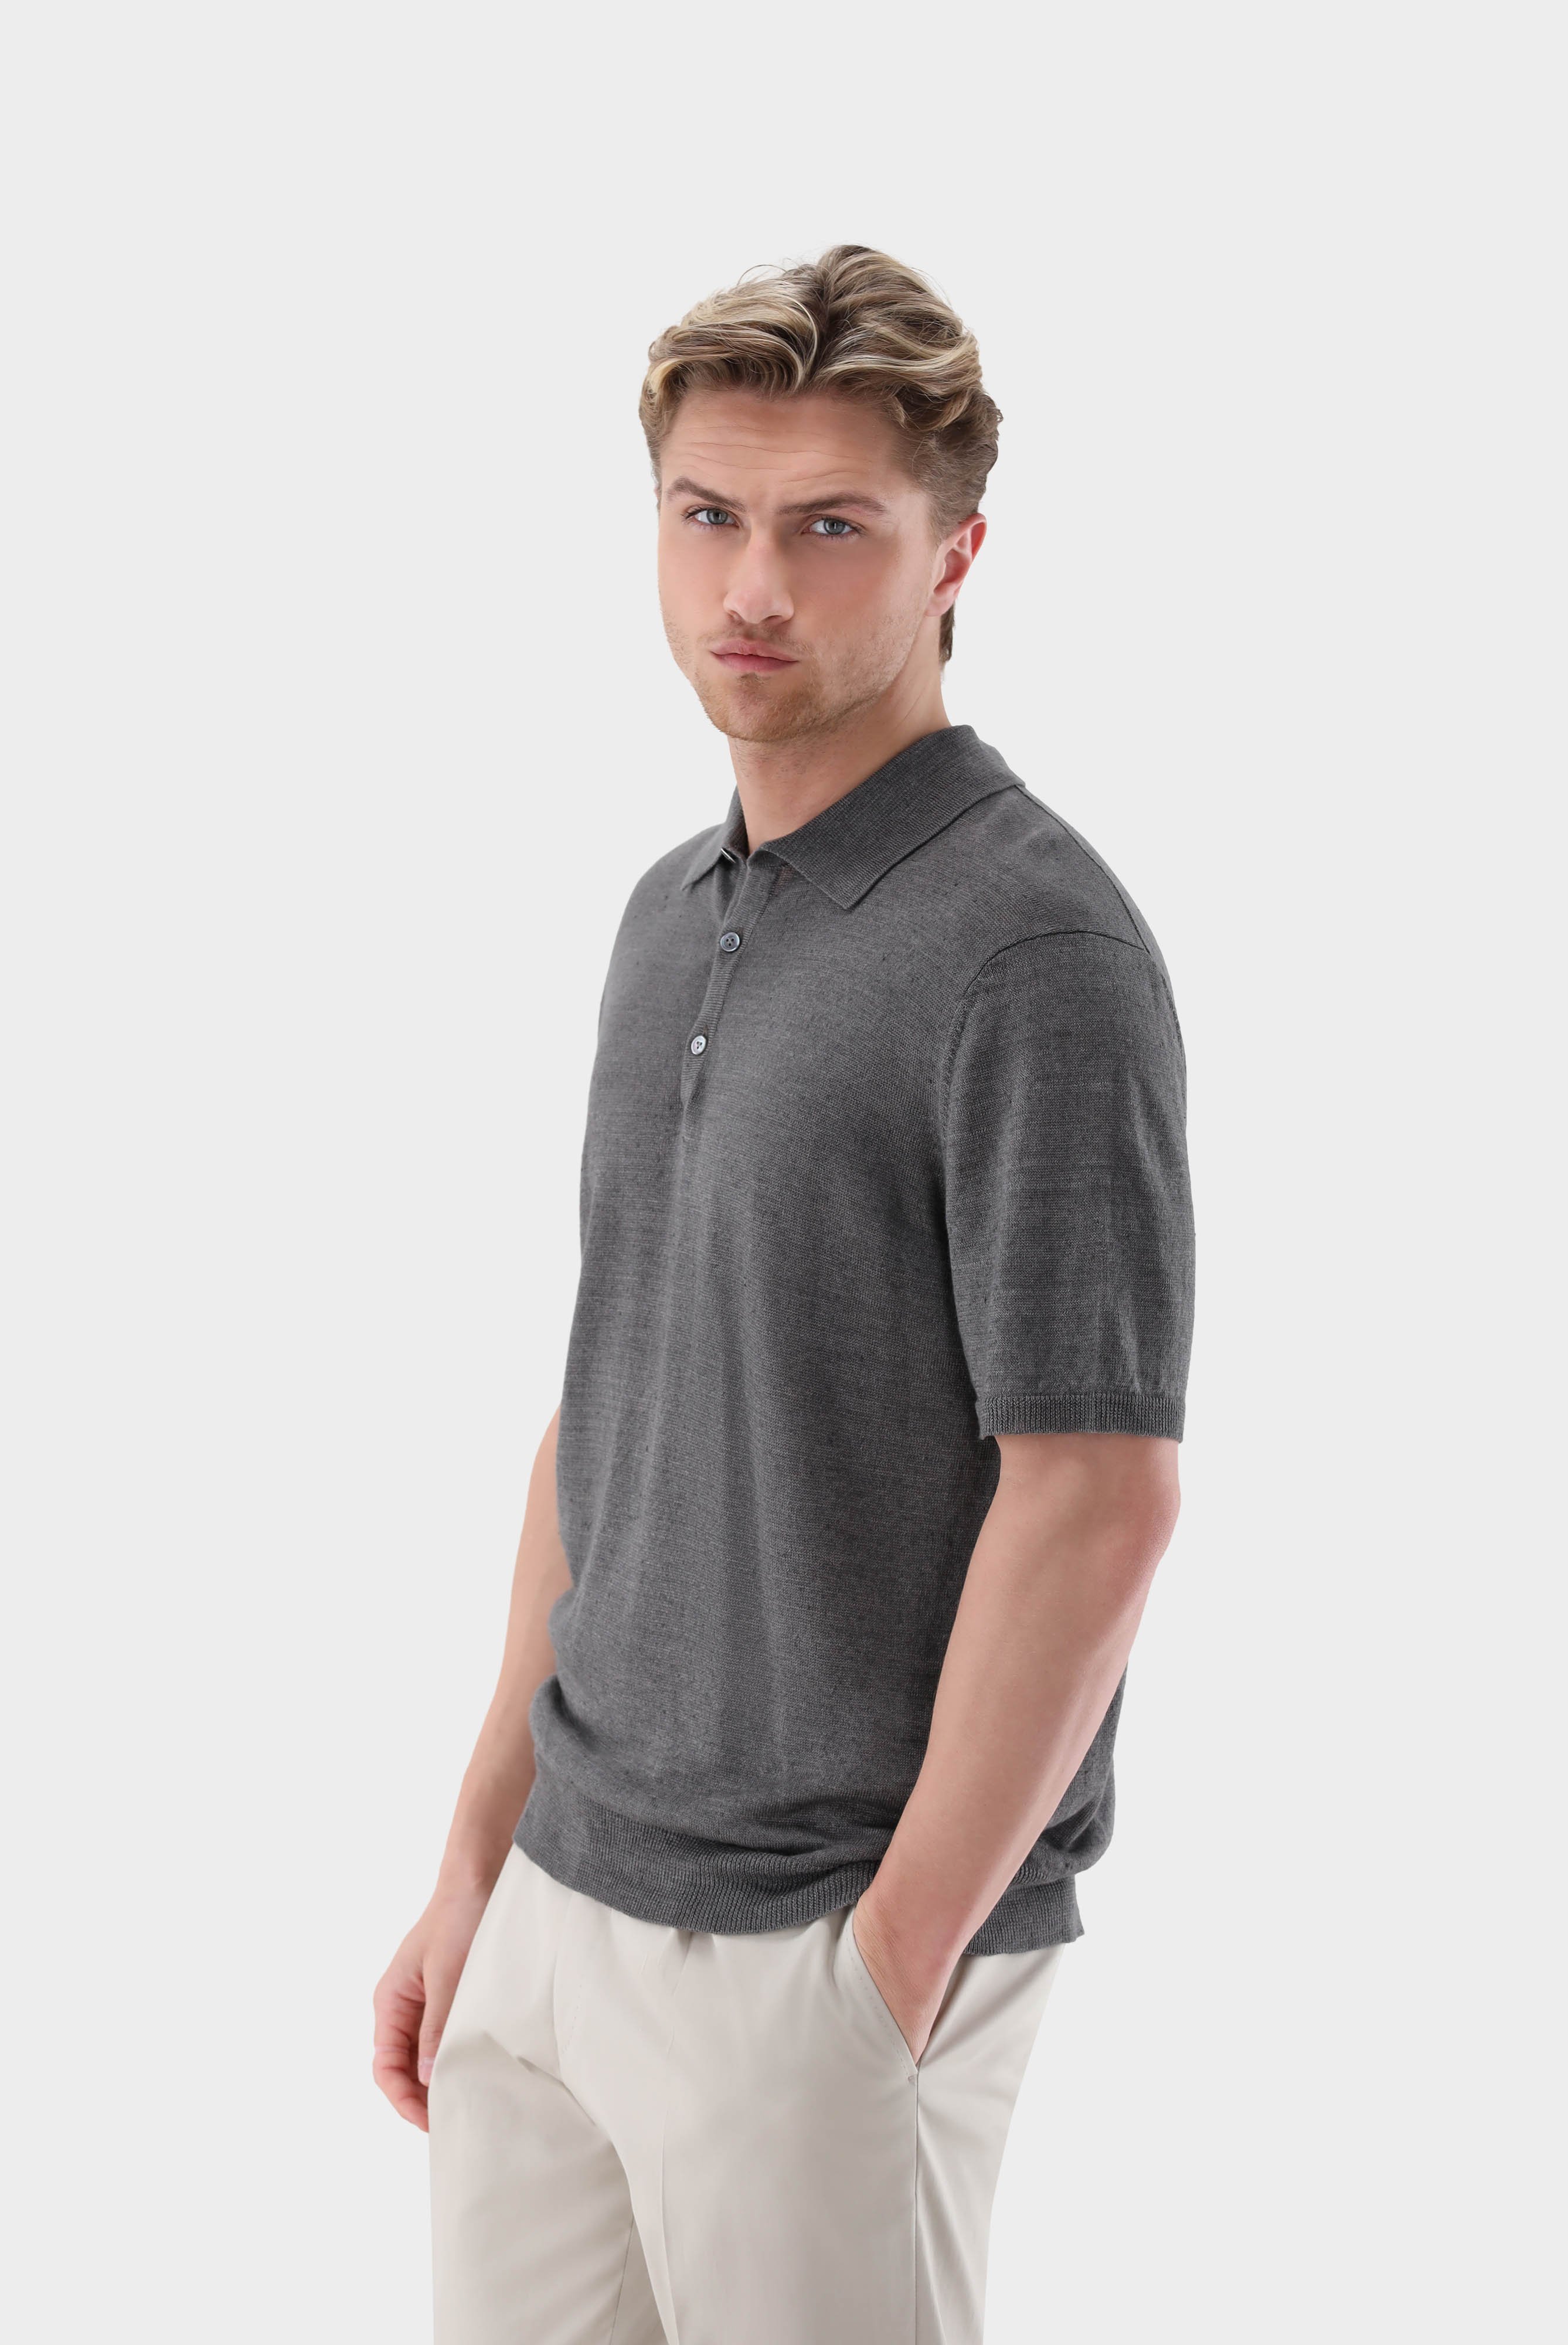 Poloshirts+Knit Polo in Linen+82.8603..S00169.990.S